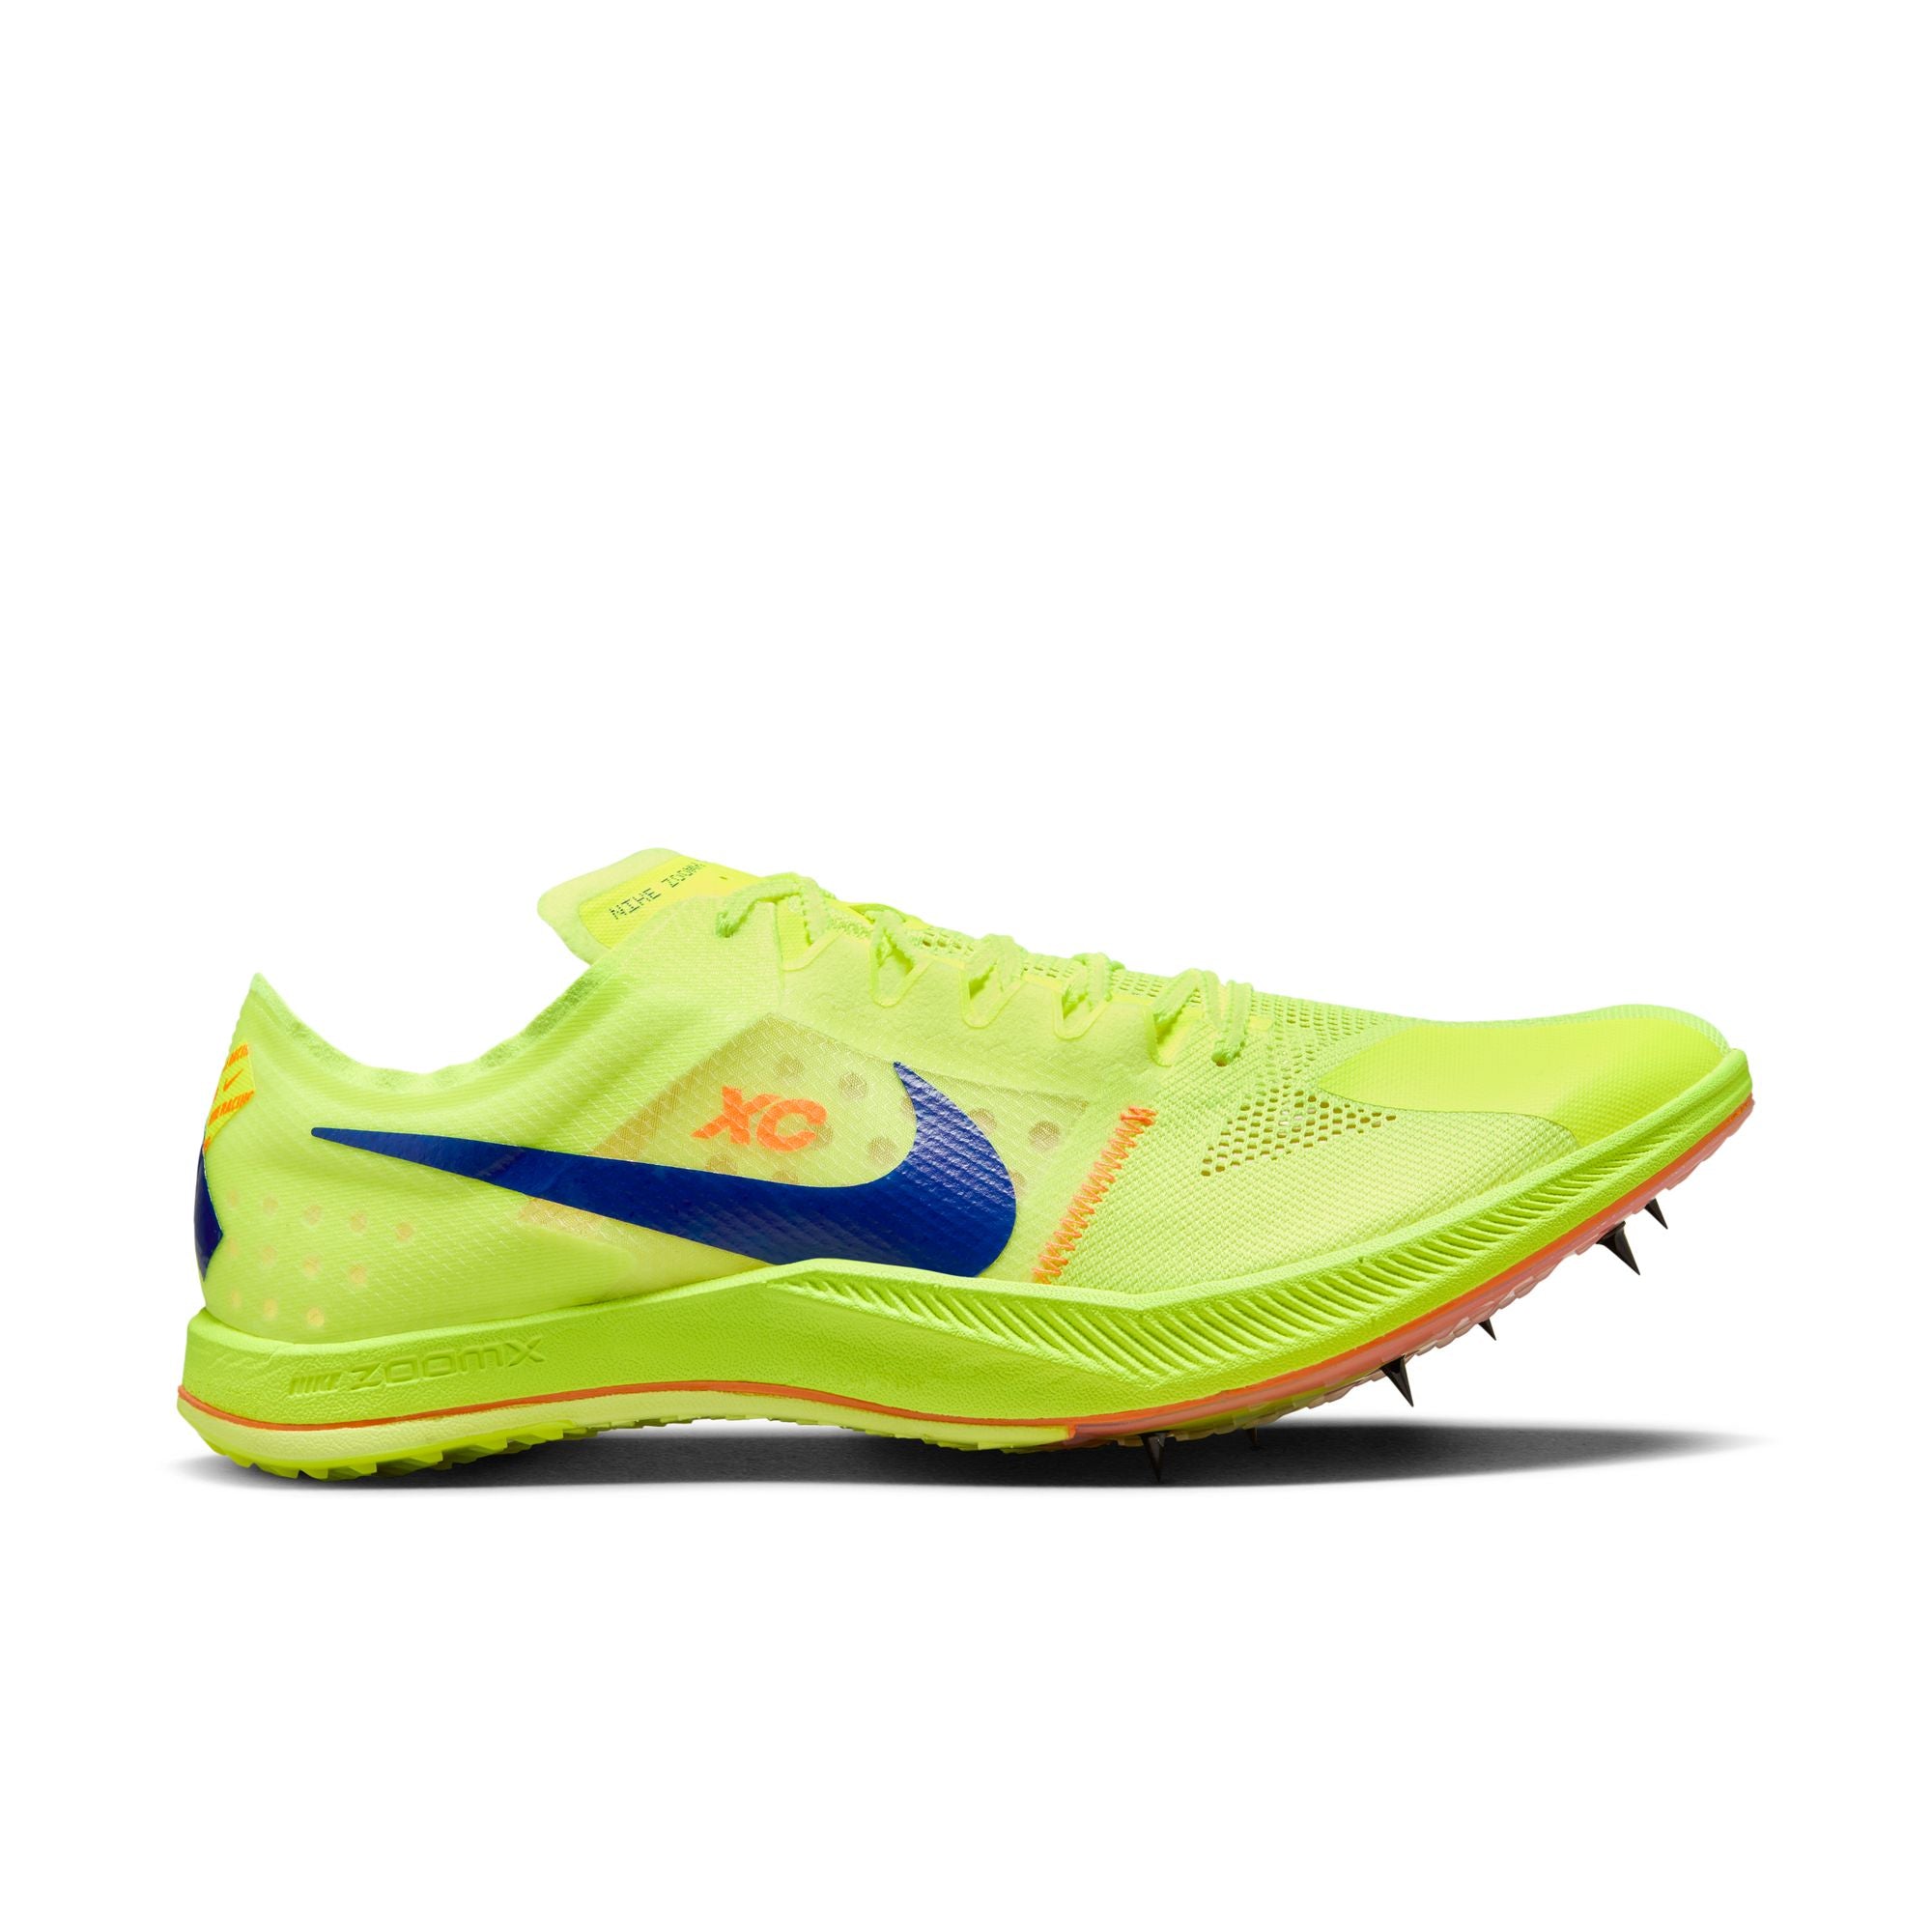 NIKE DRAGONFLY XC - 701 VOLT/CONCORD 3.0